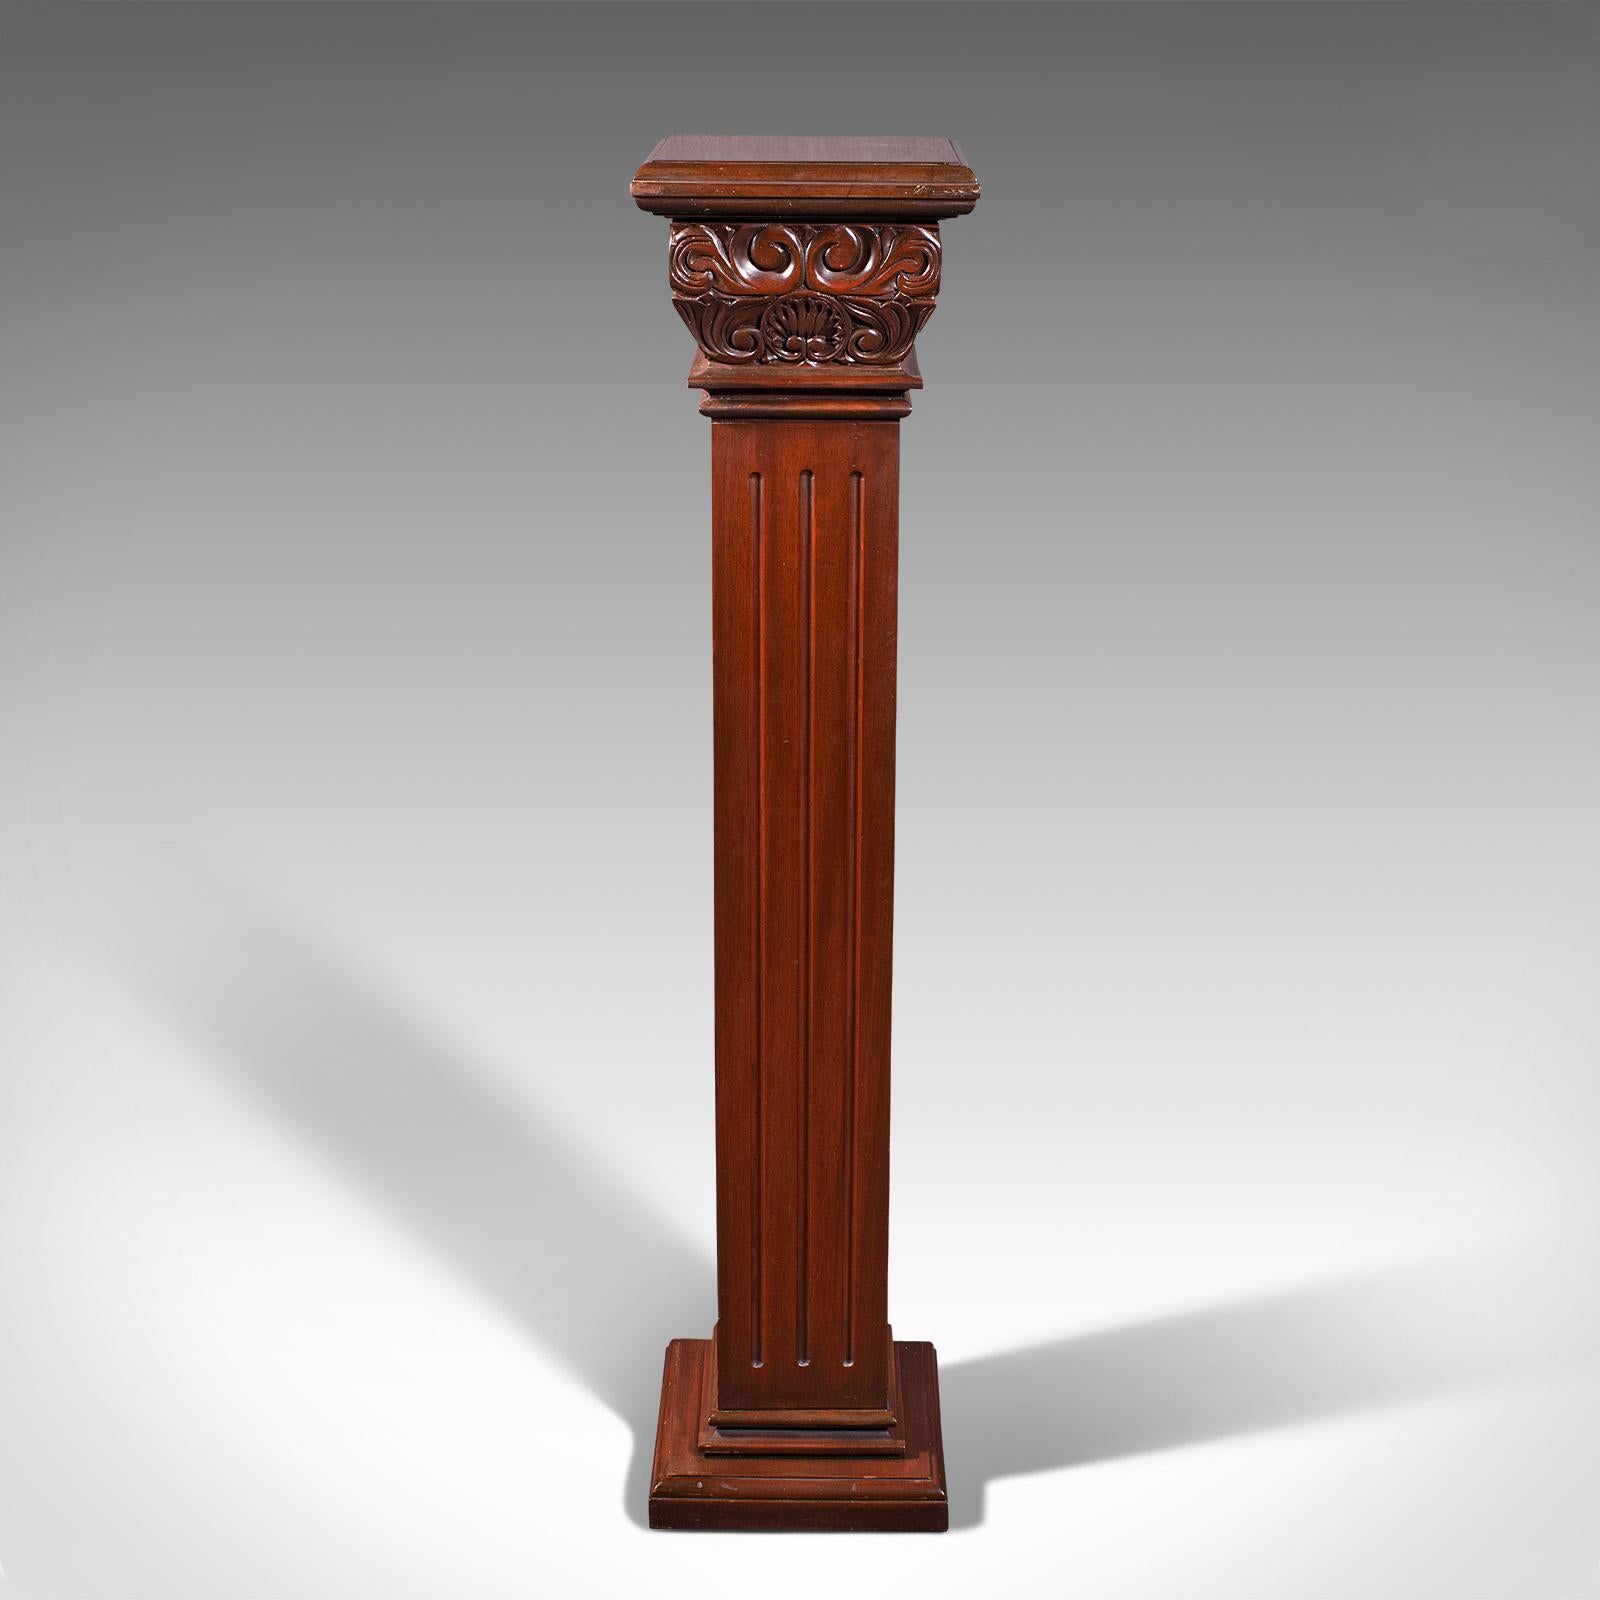 This is a vintage torchere stand. A Continental, walnut jardiniere or display column, dating to the mid 20th century, circa 1950.

Of classical taste for a timeless appeal
Displays a desirable aged patina and in good order
Walnut shows fine